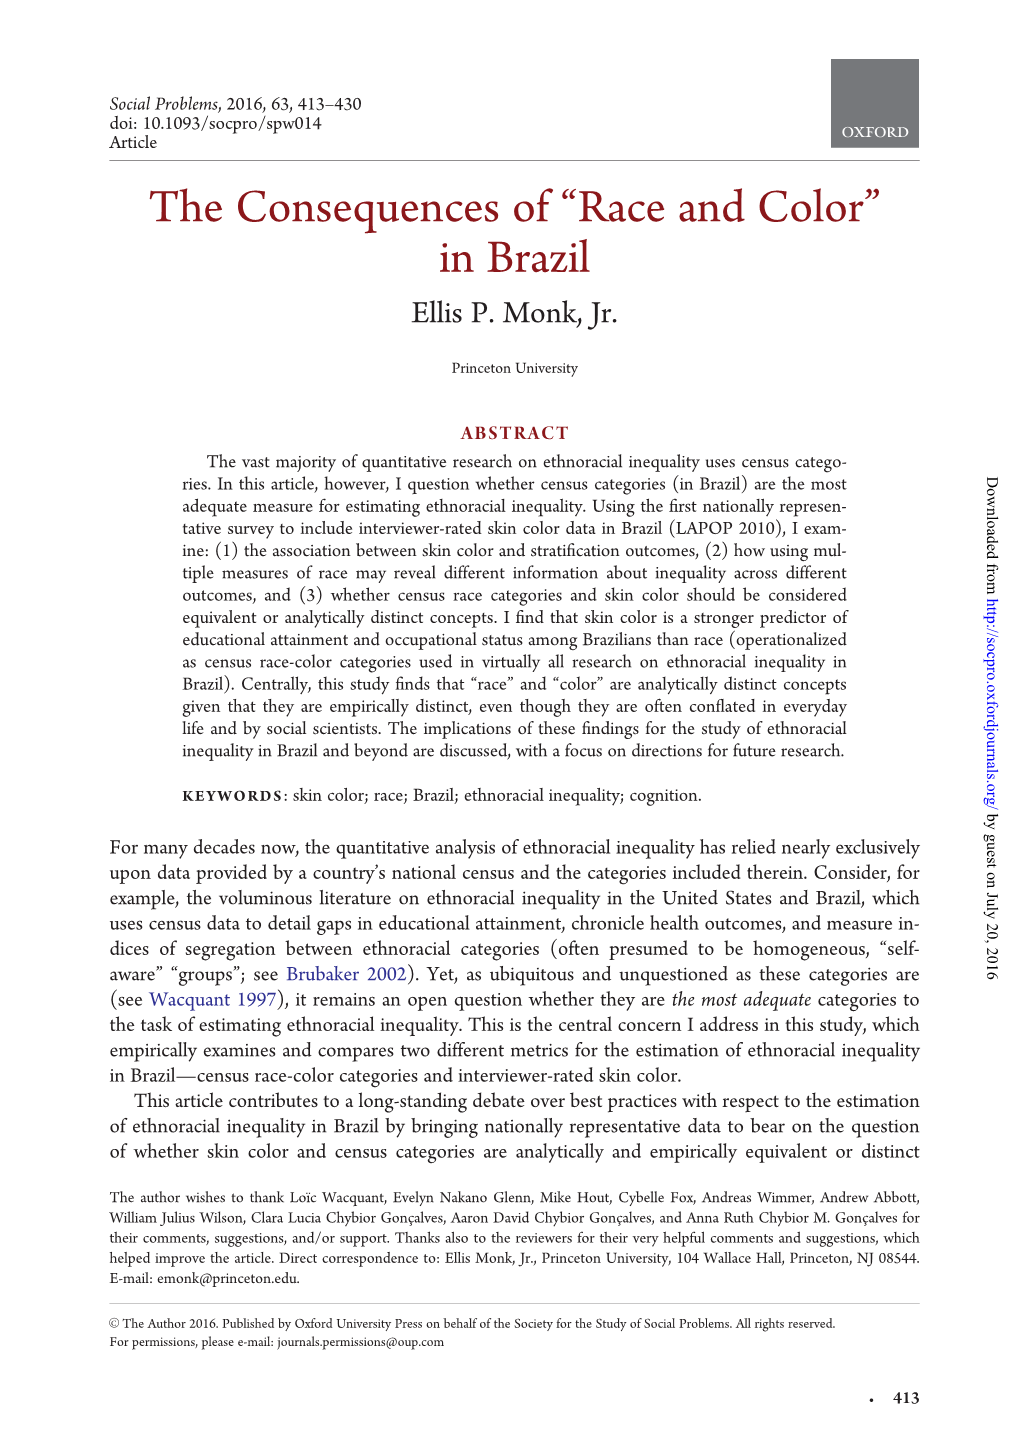 The Consequences of “Race and Color” in Brazil Ellis P